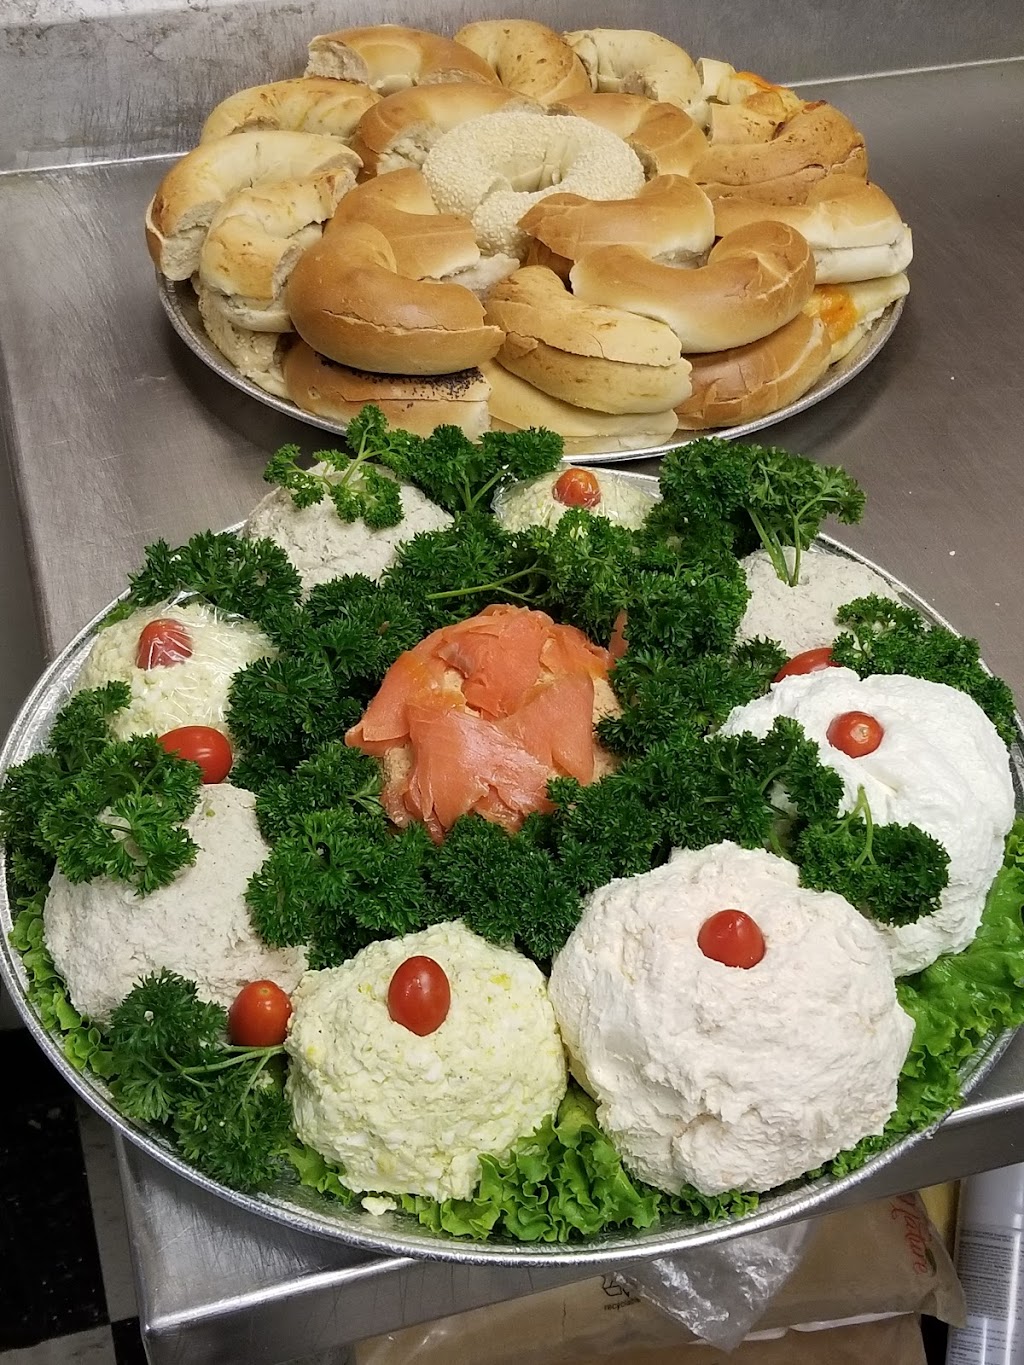 The Great Canadian Bagel | bakery | 705 Kingston Rd, Pickering, ON L1V 6K3, Canada | 9054207027 OR +1 905-420-7027